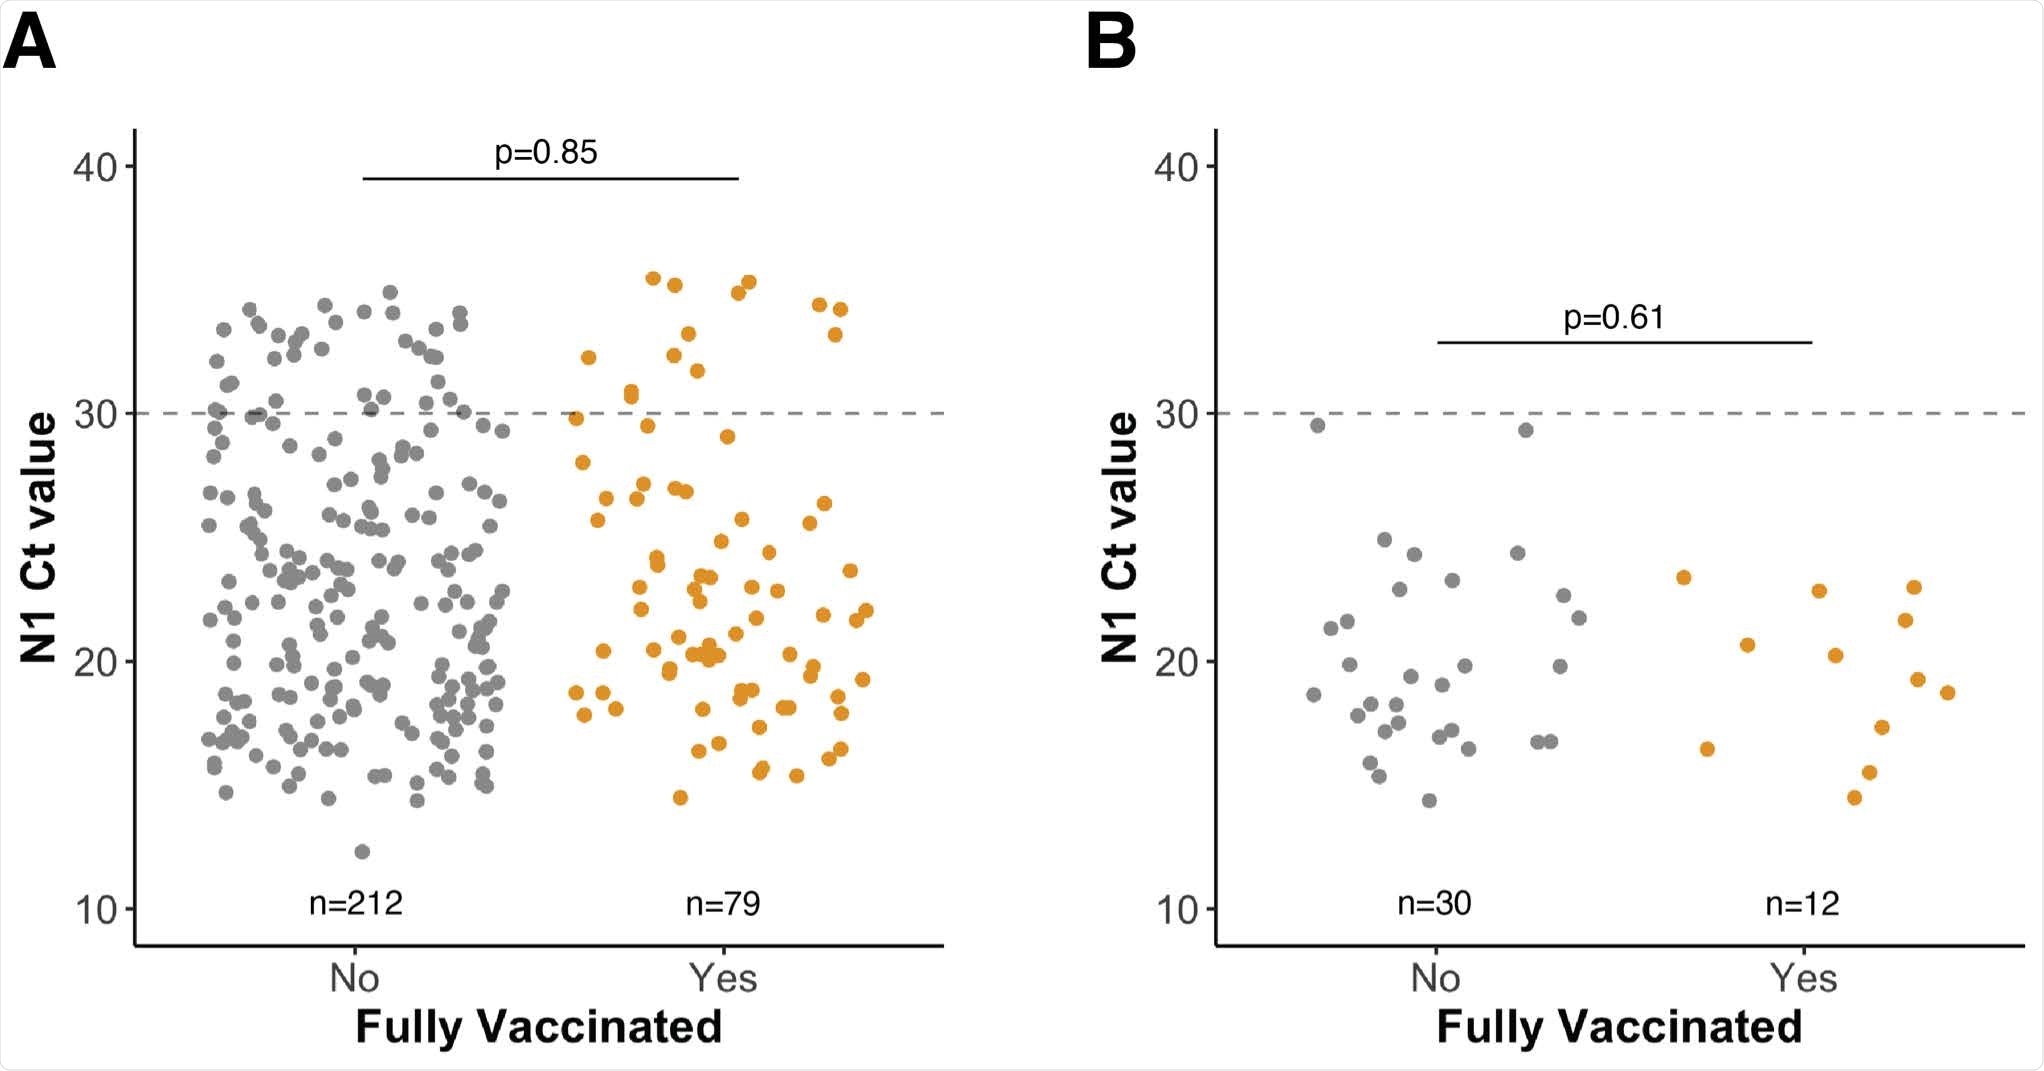 Viral loads for the expanded Wisconsin cohort, including Dane County, are independent of vaccination status. A) N1 cycle threshold (Ct) values for SARS-CoV-2-positive specimens grouped by vaccination status. Specimens were collected from 11 Wisconsin counties. B) N1 Ct values for SARS-CoV-2-positive specimens were confirmed to be delta variants by sequencing. In A and B, the horizontal dashed line represents the threshold for consistent recovery of infectious virus as well as our Ct cut-off for sequencing specimens. Sequence data were available only for specimens collected on or before 16 July 2021, not all samples with a Ct < 30 were sequenced successfully, and not all were delta, accounting for the relatively low number of delta confirmed sequences. P-values were calculated by comparing mean Ct values between groups by Welch two-sample t-tests. Data from the expanded Wisconsin cohort, including Dane County, are shown.